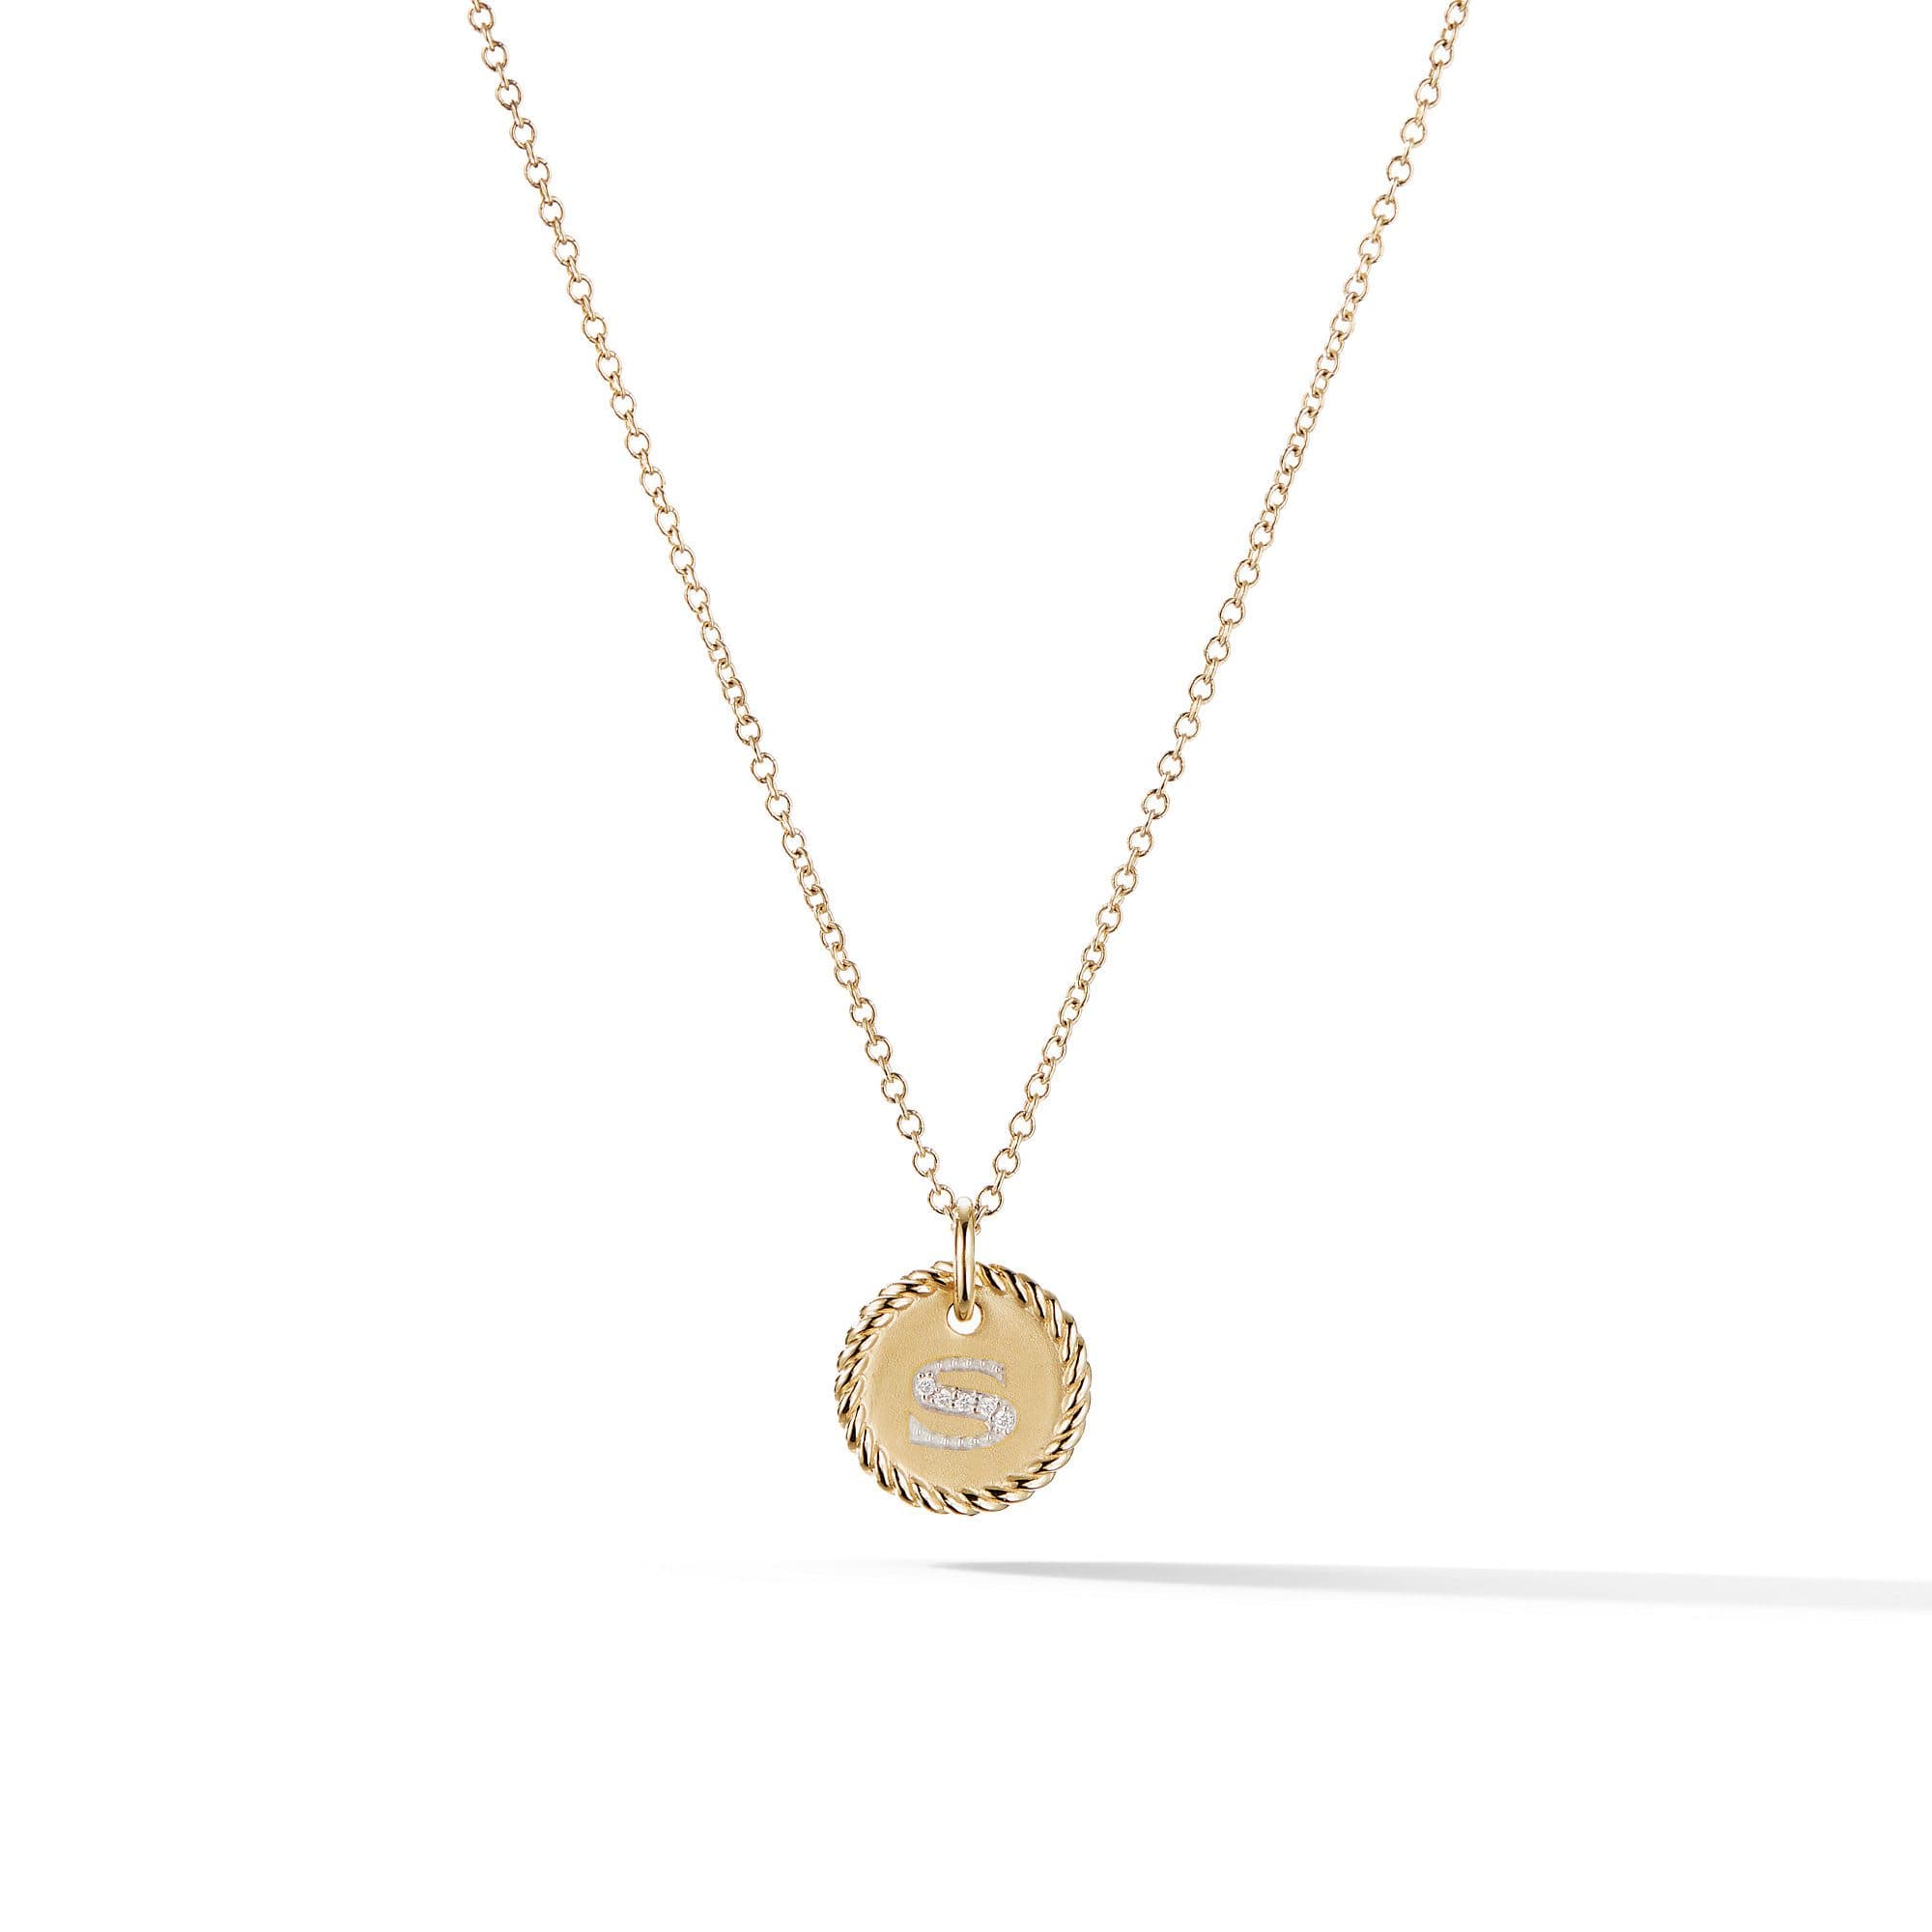 David Yurman S Initial Charm Necklace in 18k Yellow Gold with Diamonds